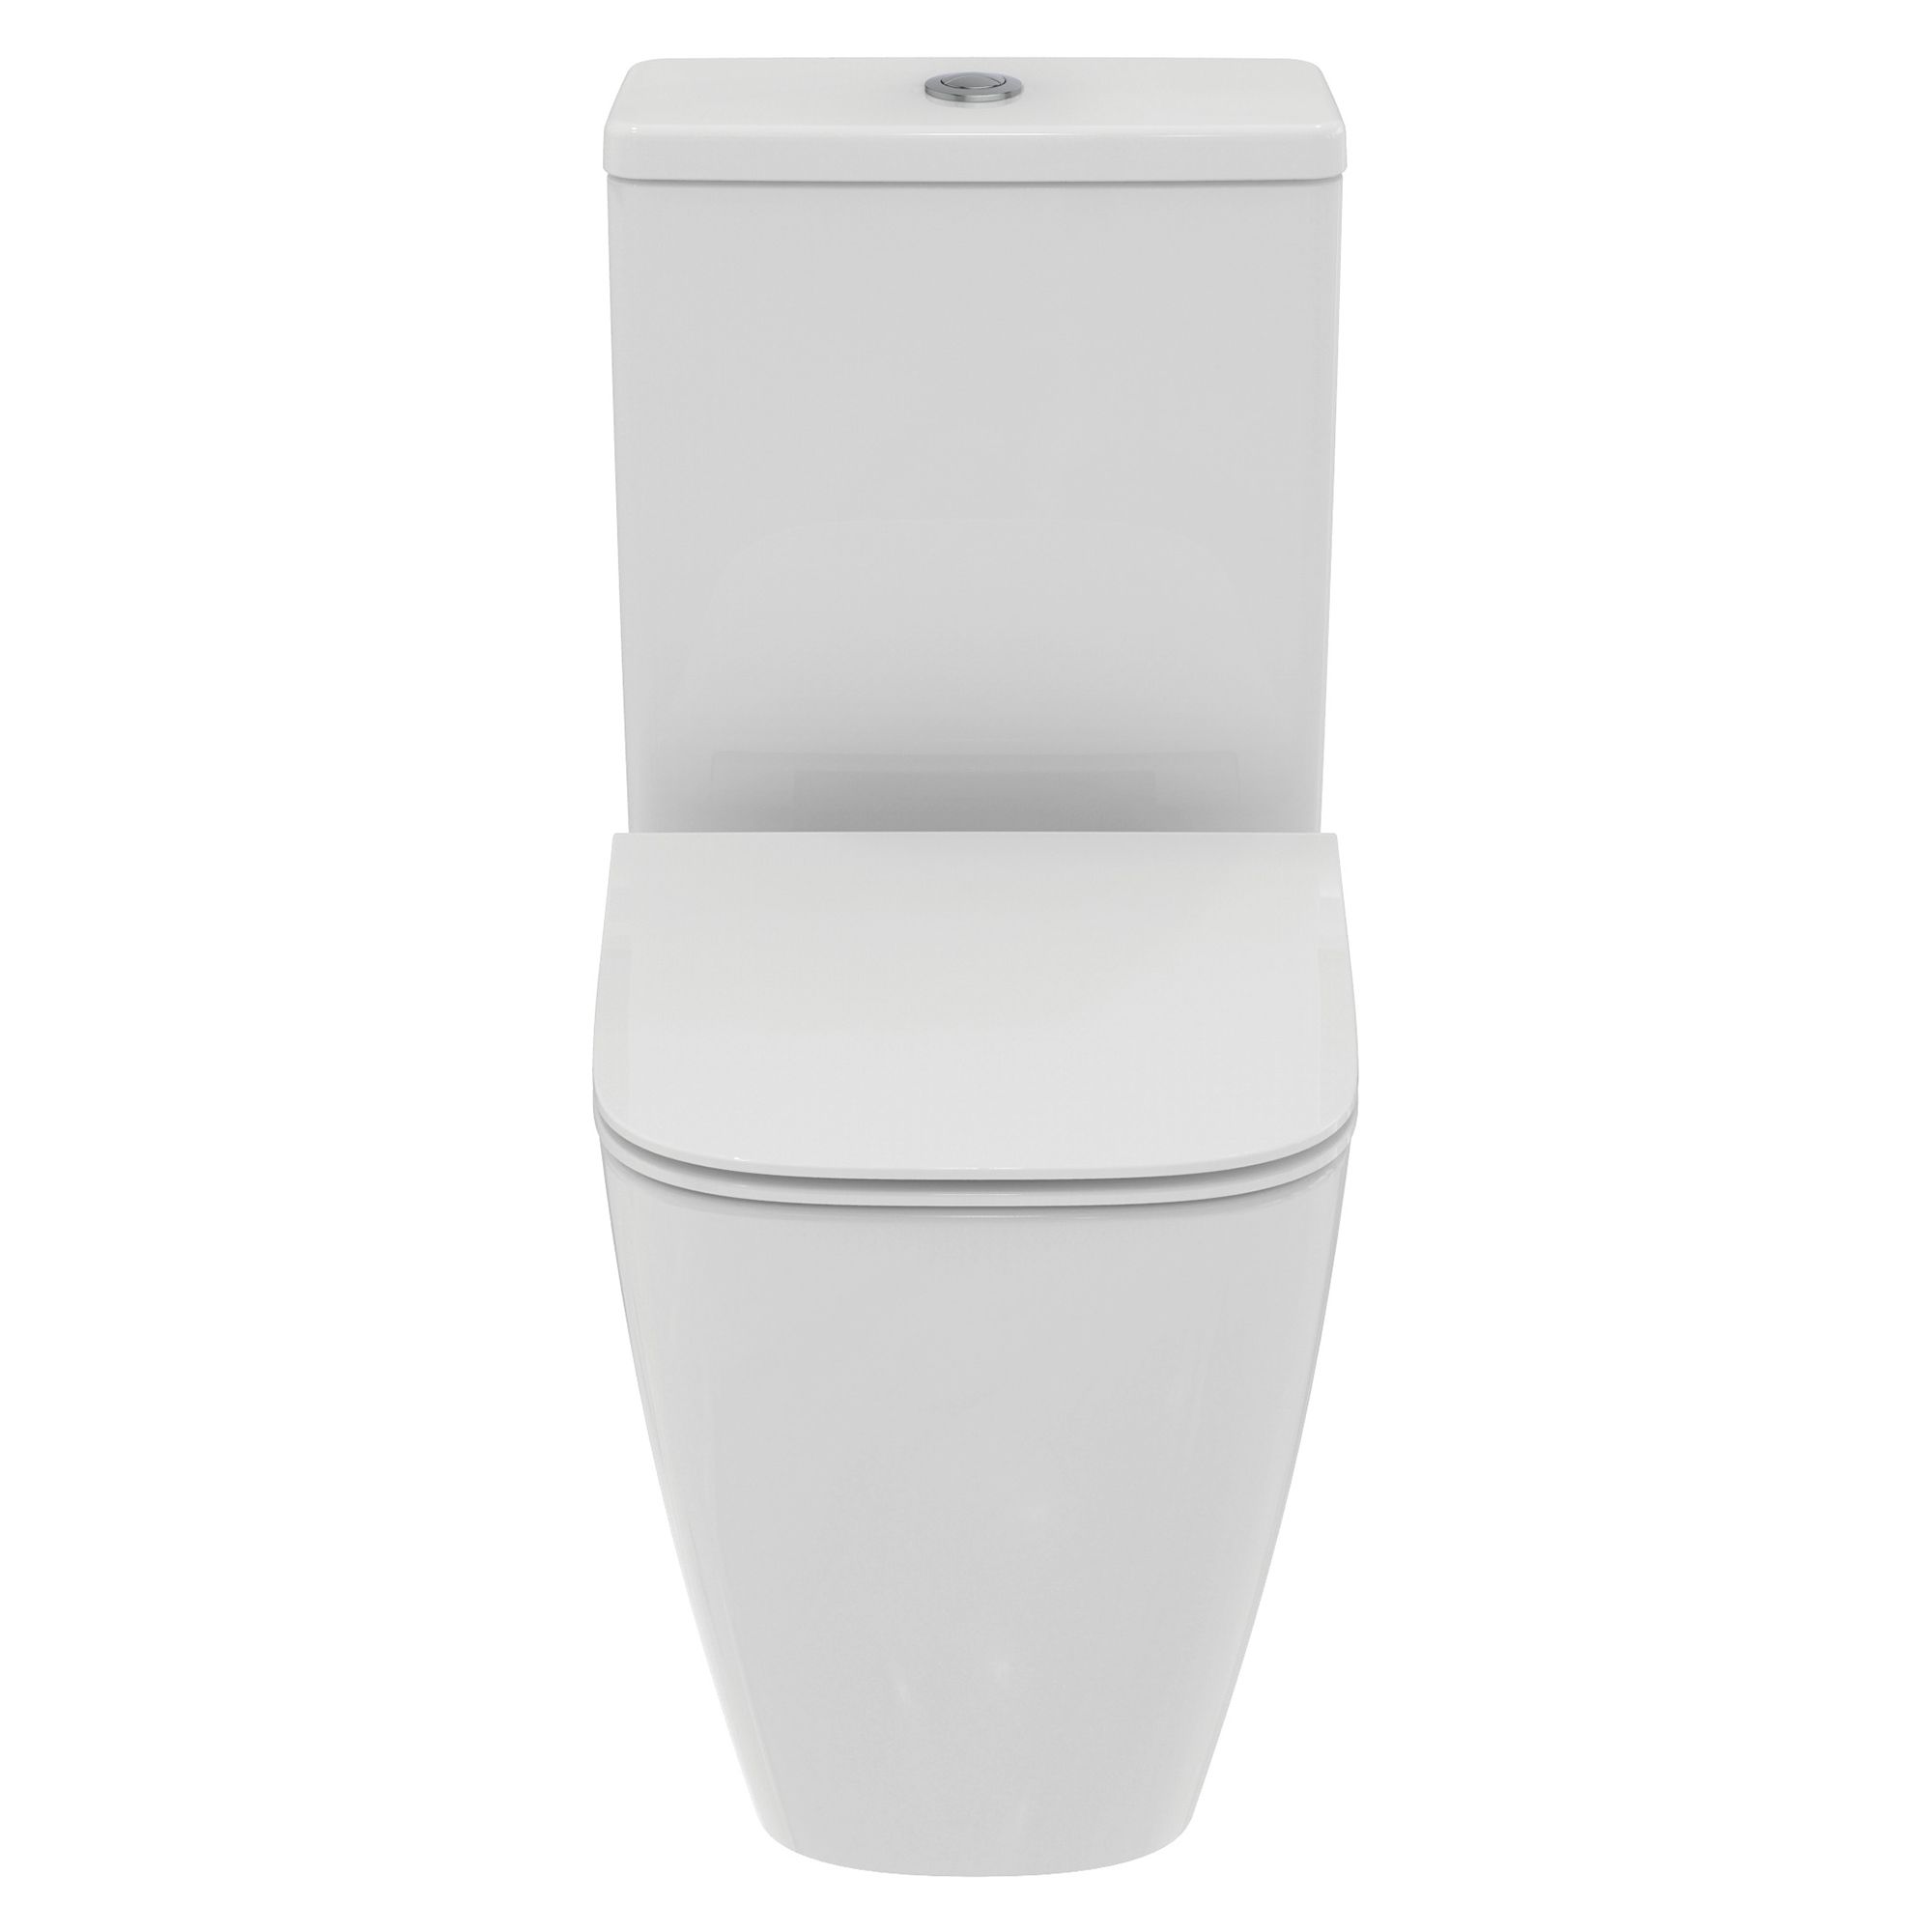 Ideal Standard i.life S White Standard Back to wall Square Close coupled Toilet set with Soft close seat